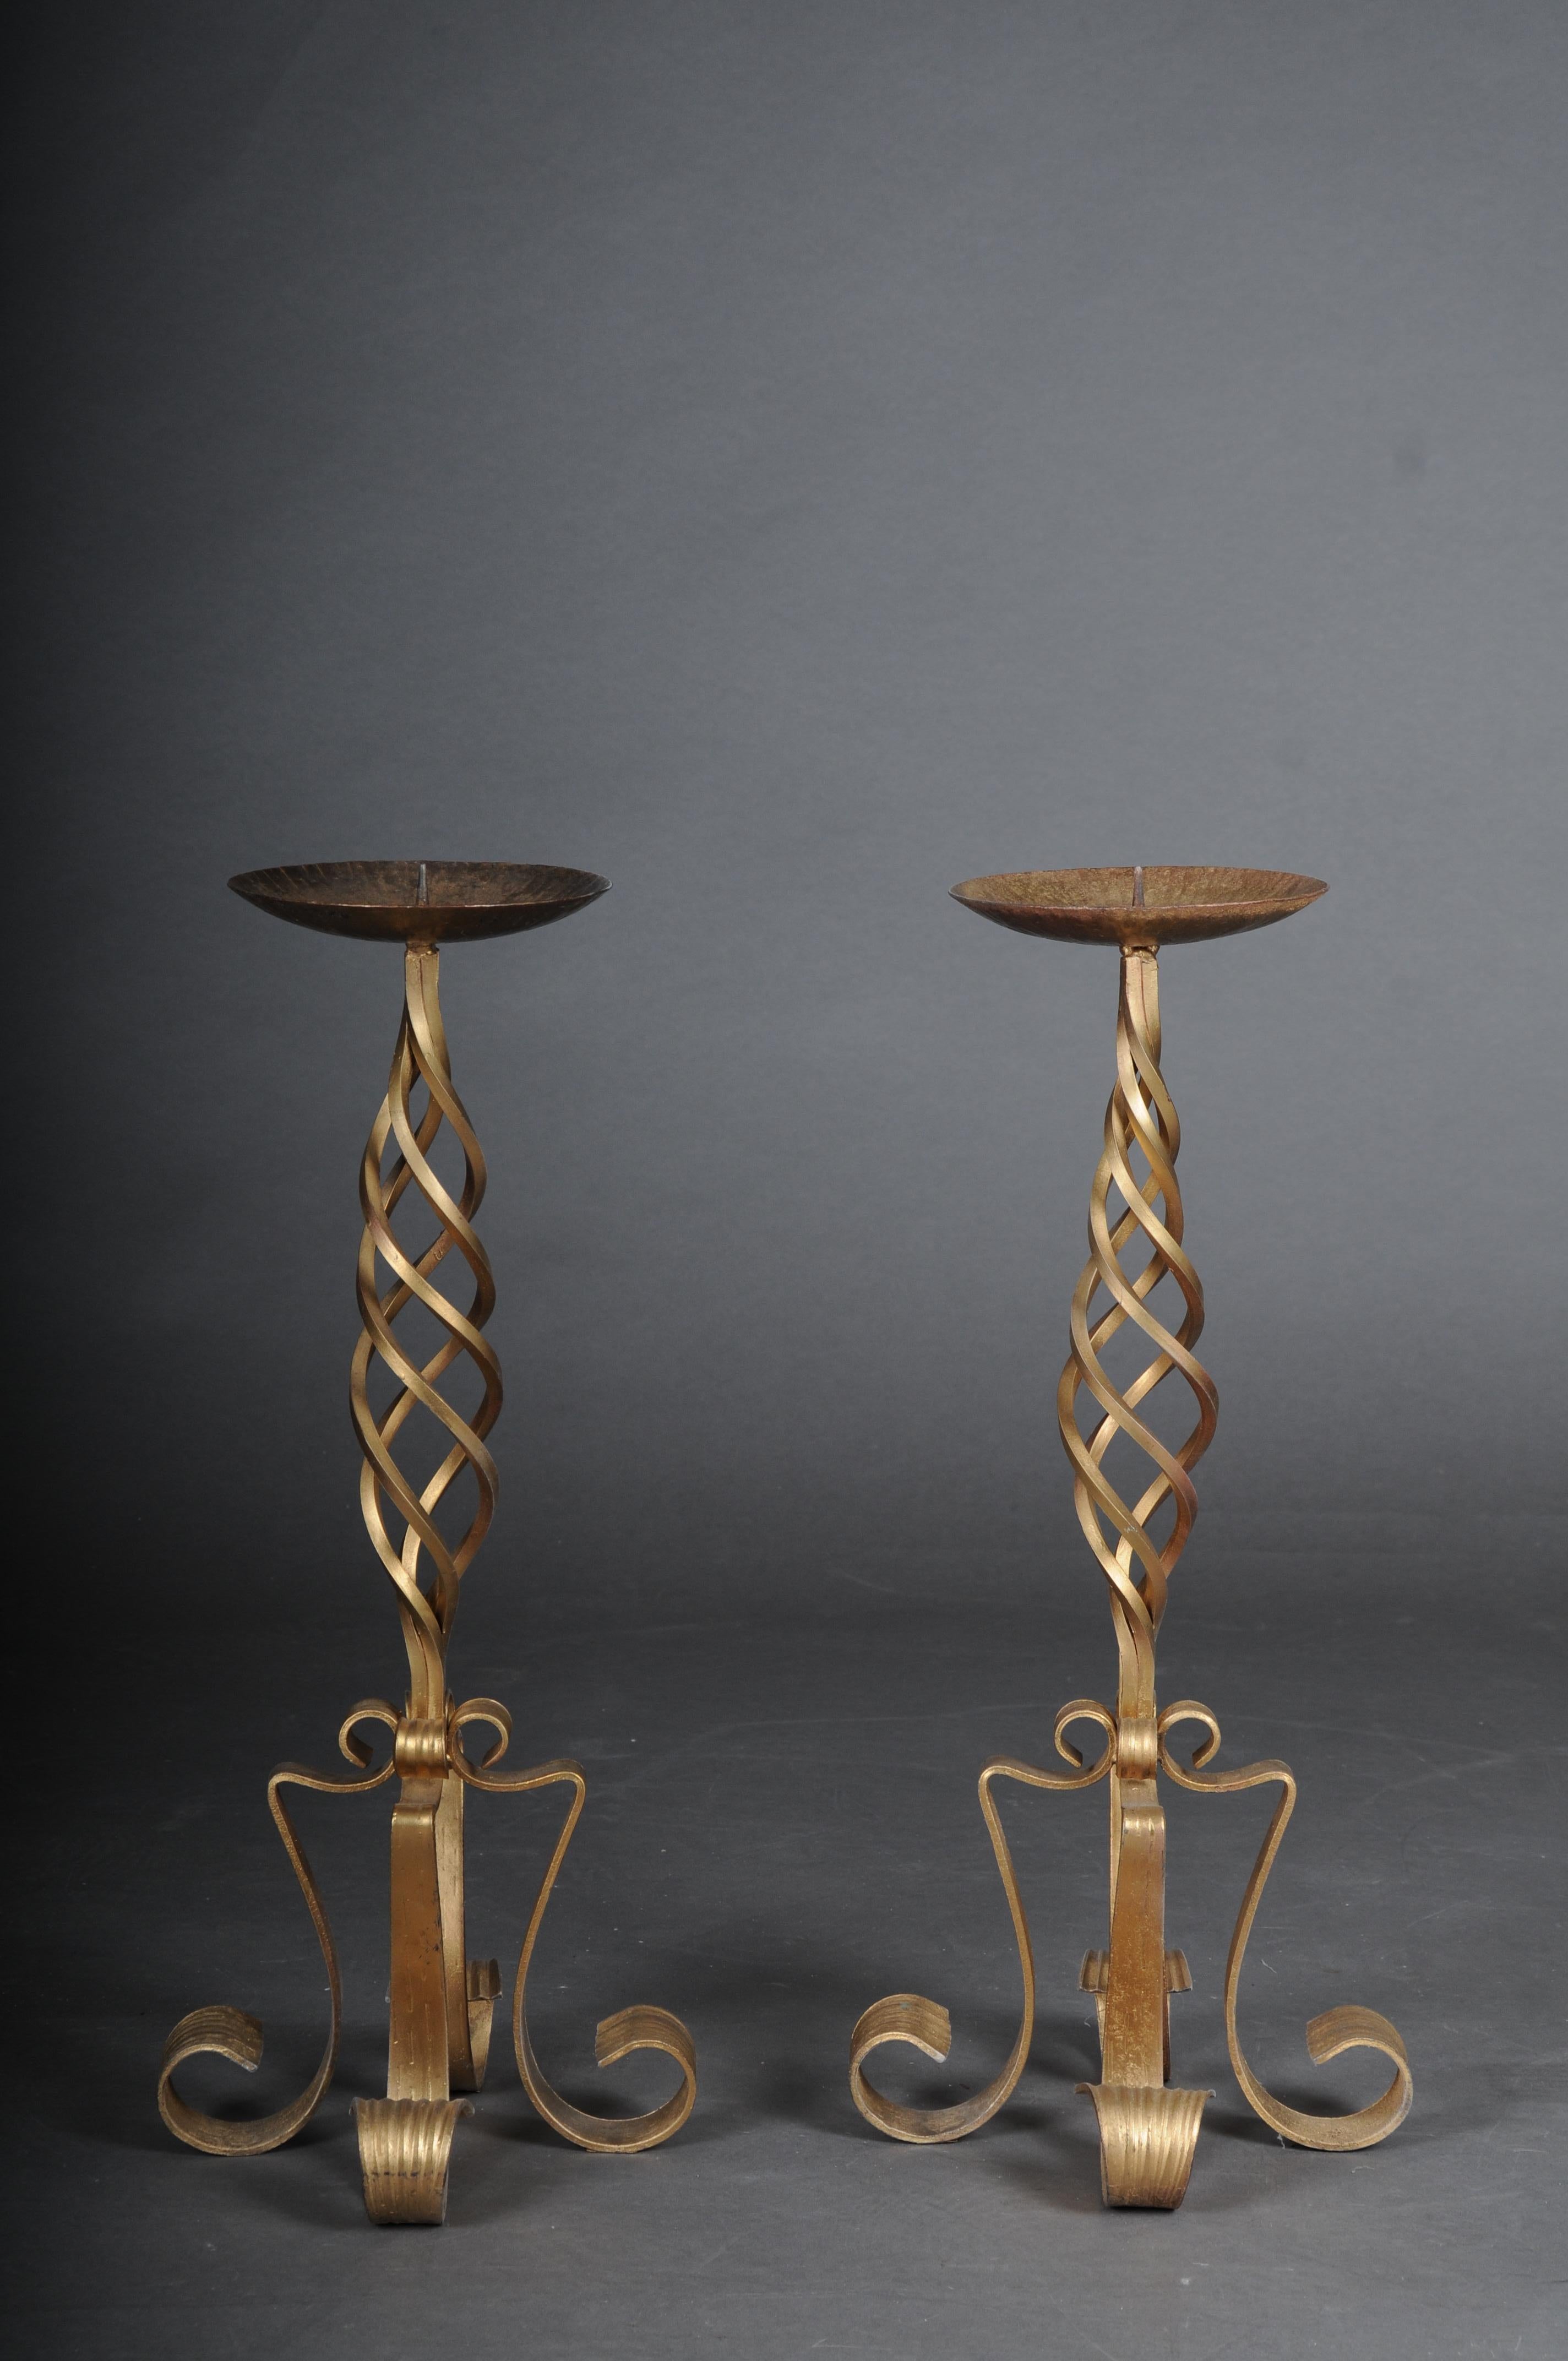 Fancy torchères/candlesticks in gilded cast iron

Spiral-shaped body, made of iron. With a wide candle plate.